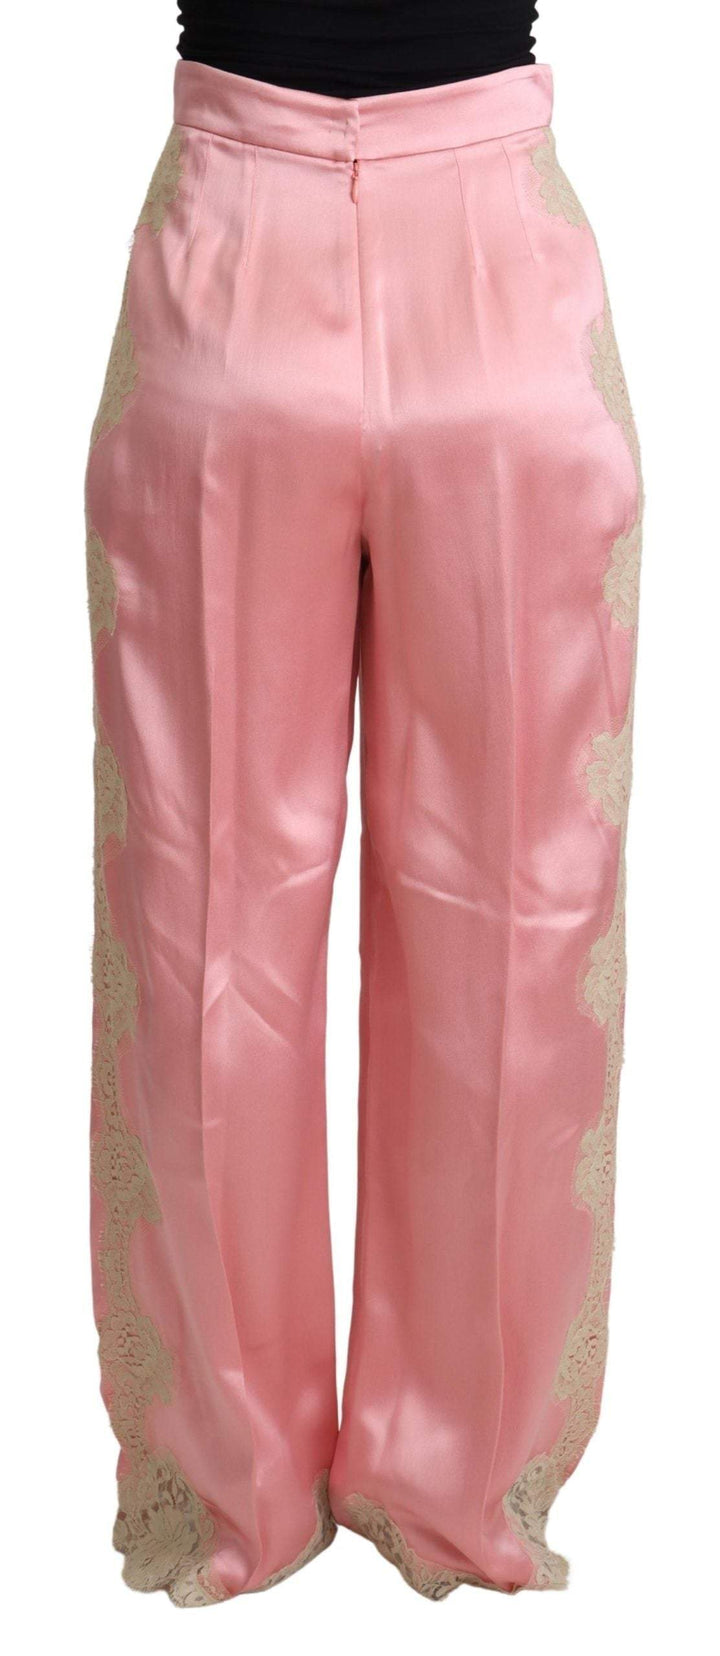 Dolce & Gabbana Pink Lace Trimmed Silk Satin Wide Legs Pants #women, Dolce & Gabbana, feed-agegroup-adult, feed-color-Pink, feed-gender-female, IT38|XS, IT40|S, IT42|M, IT44|L, IT46|XL, IT48|XXL, IT50|3XL, Jeans & Pants - Women - Clothing, Pink, Women - New Arrivals at SEYMAYKA